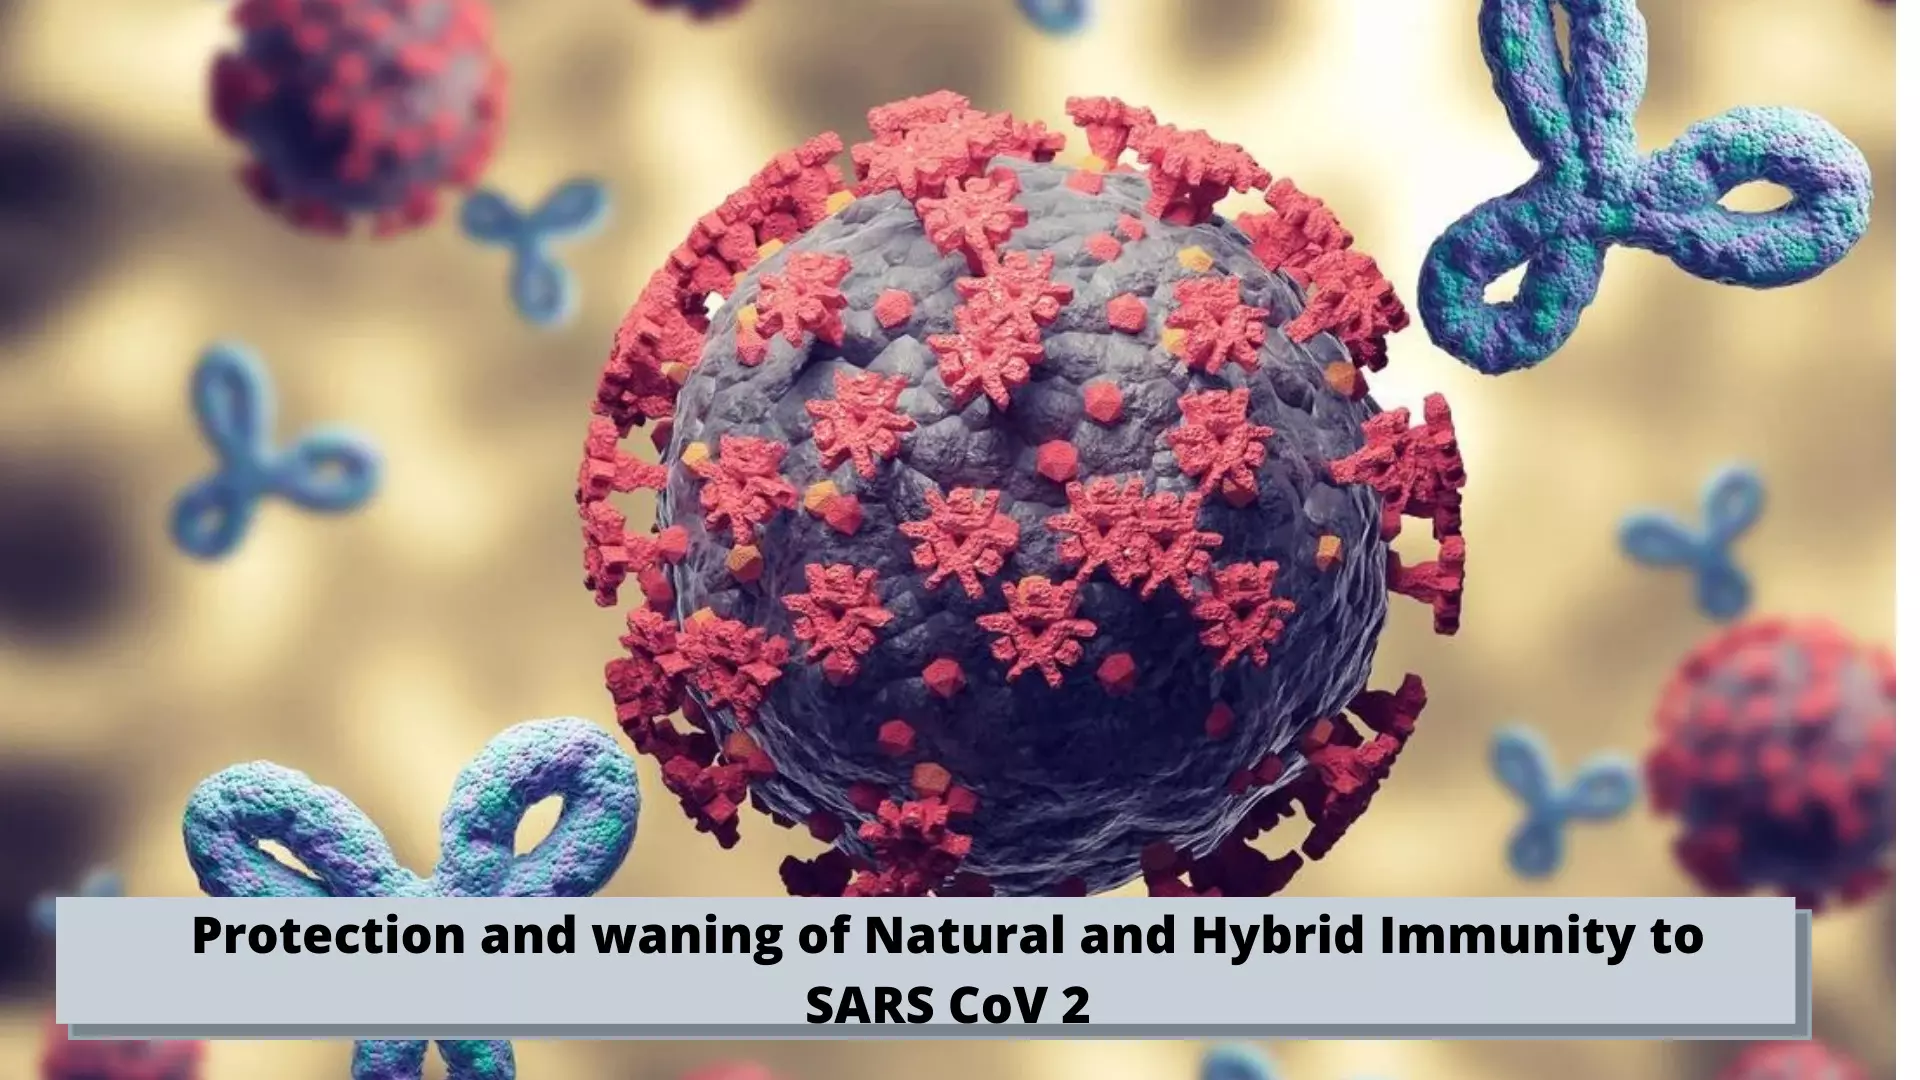 Protection and waning of Natural and Hybrid Immunity to SARS CoV 2